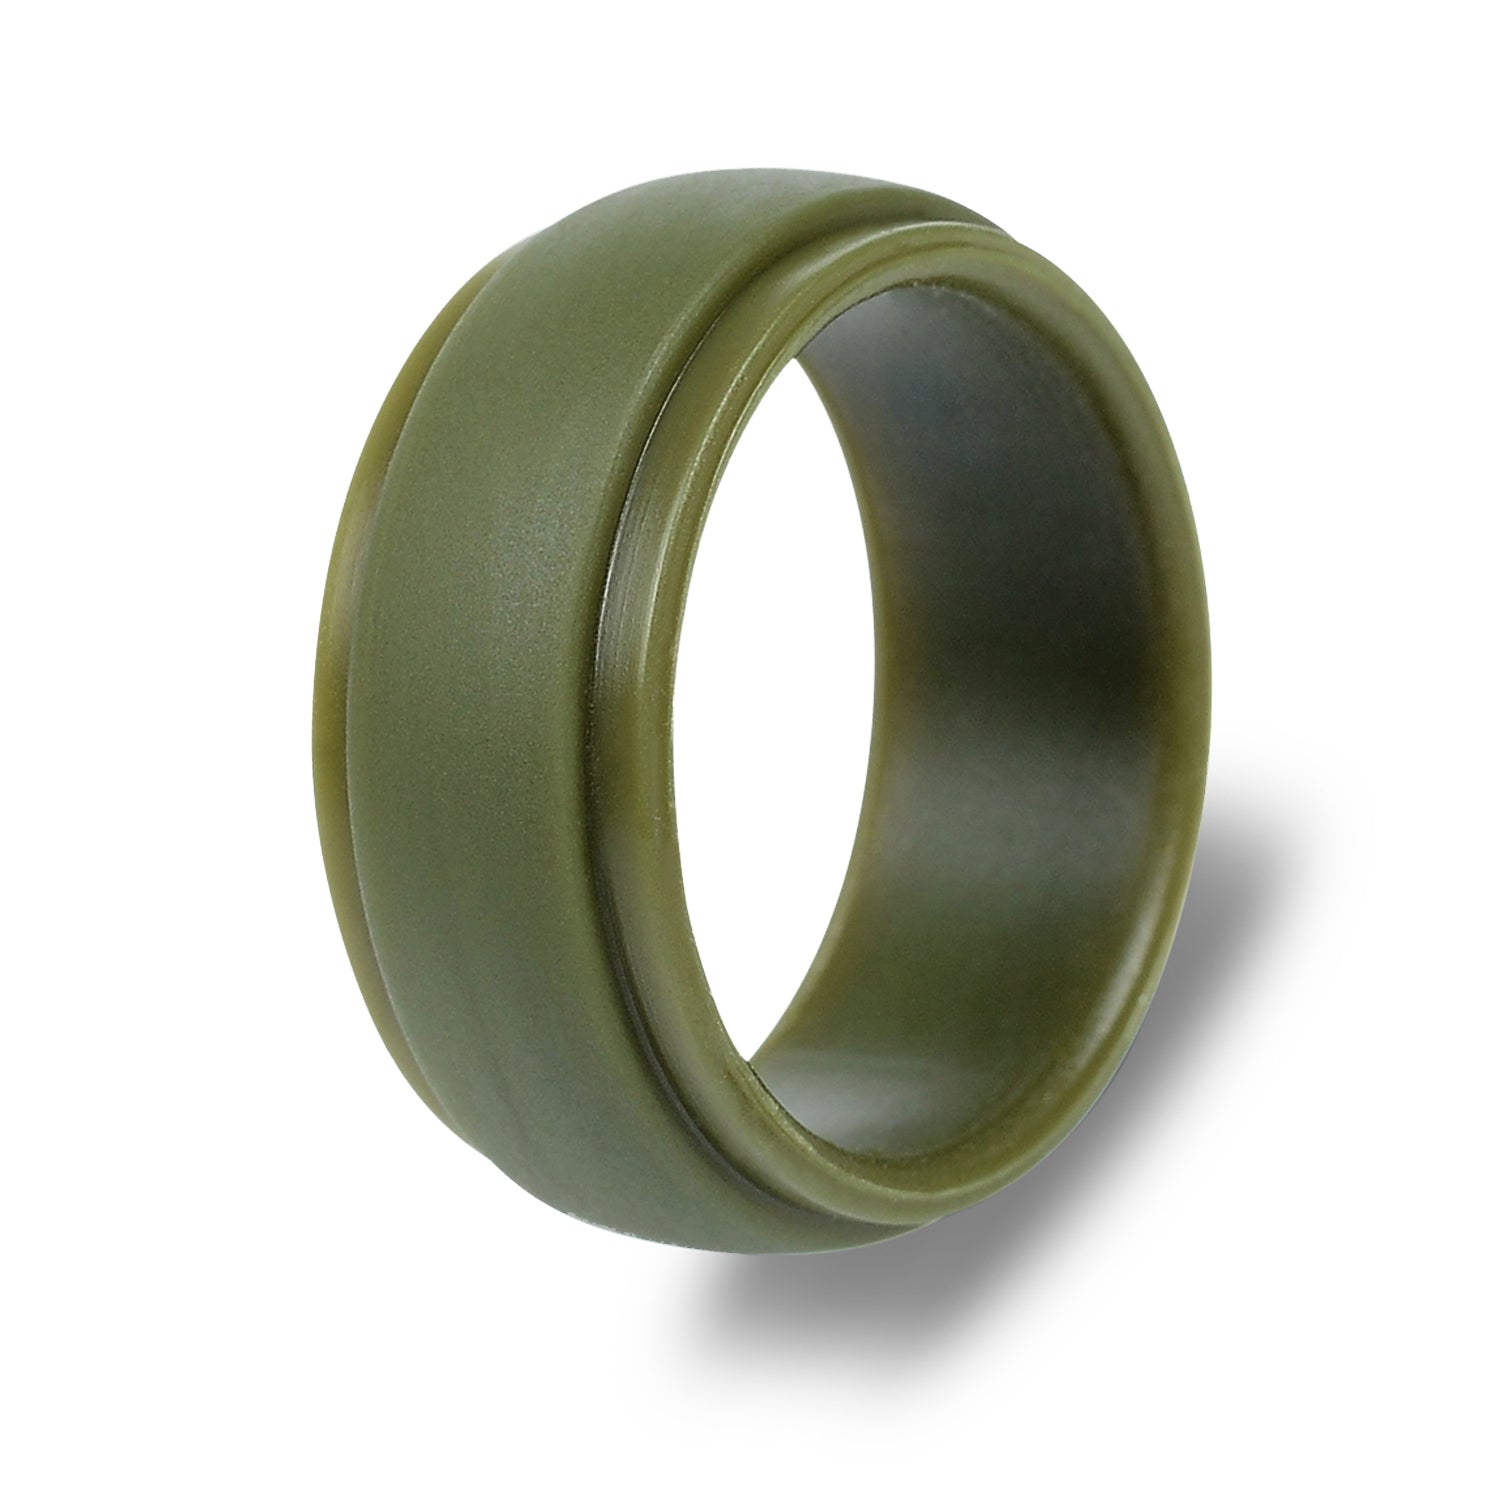 The Moss - Silicone Ring